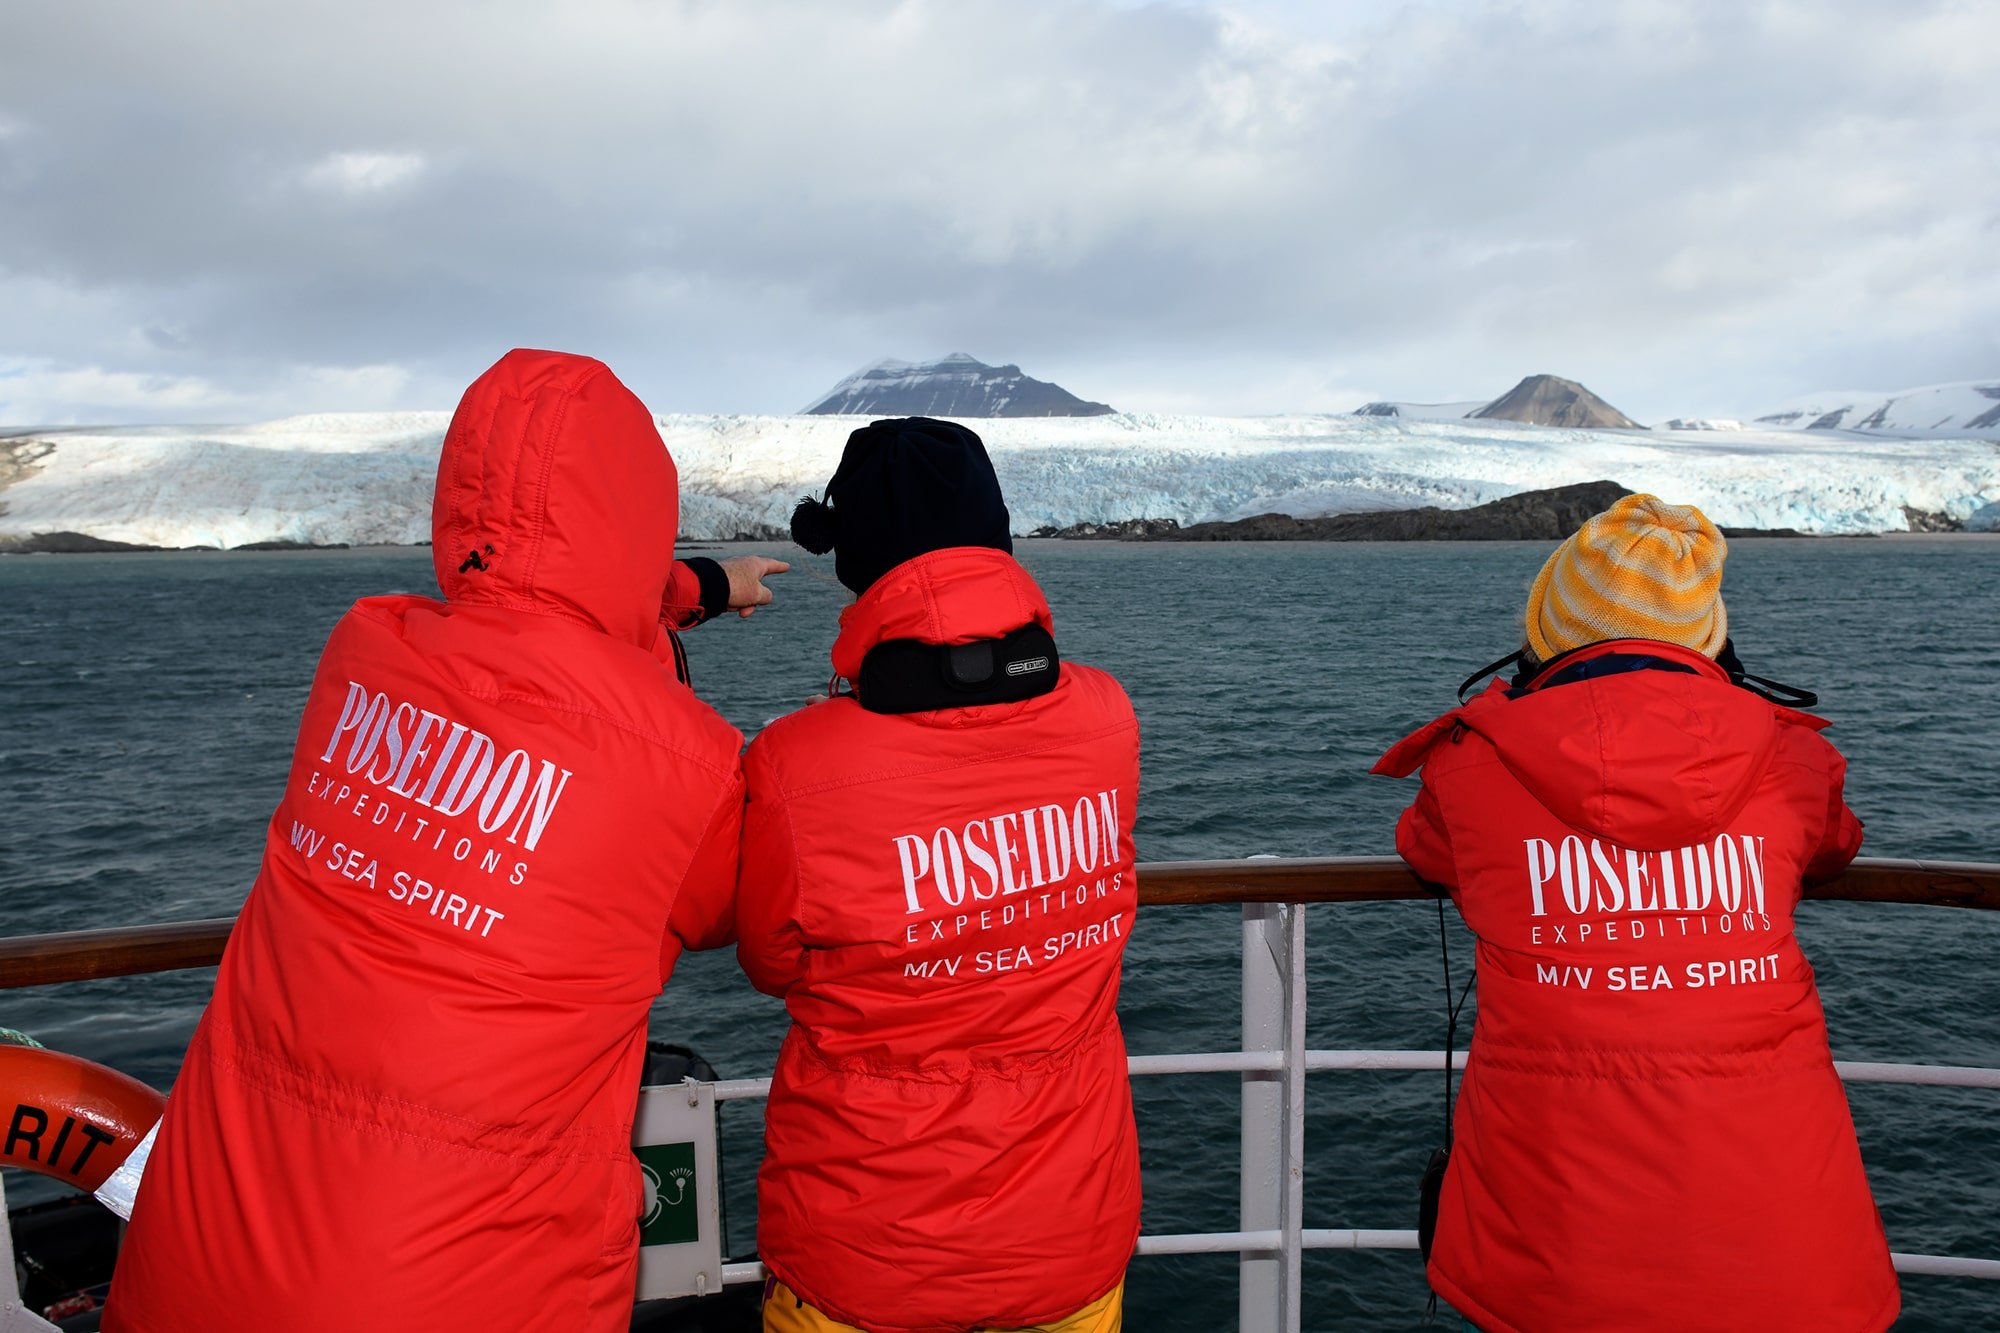 Viewing Svalbard glacier from expedition ship